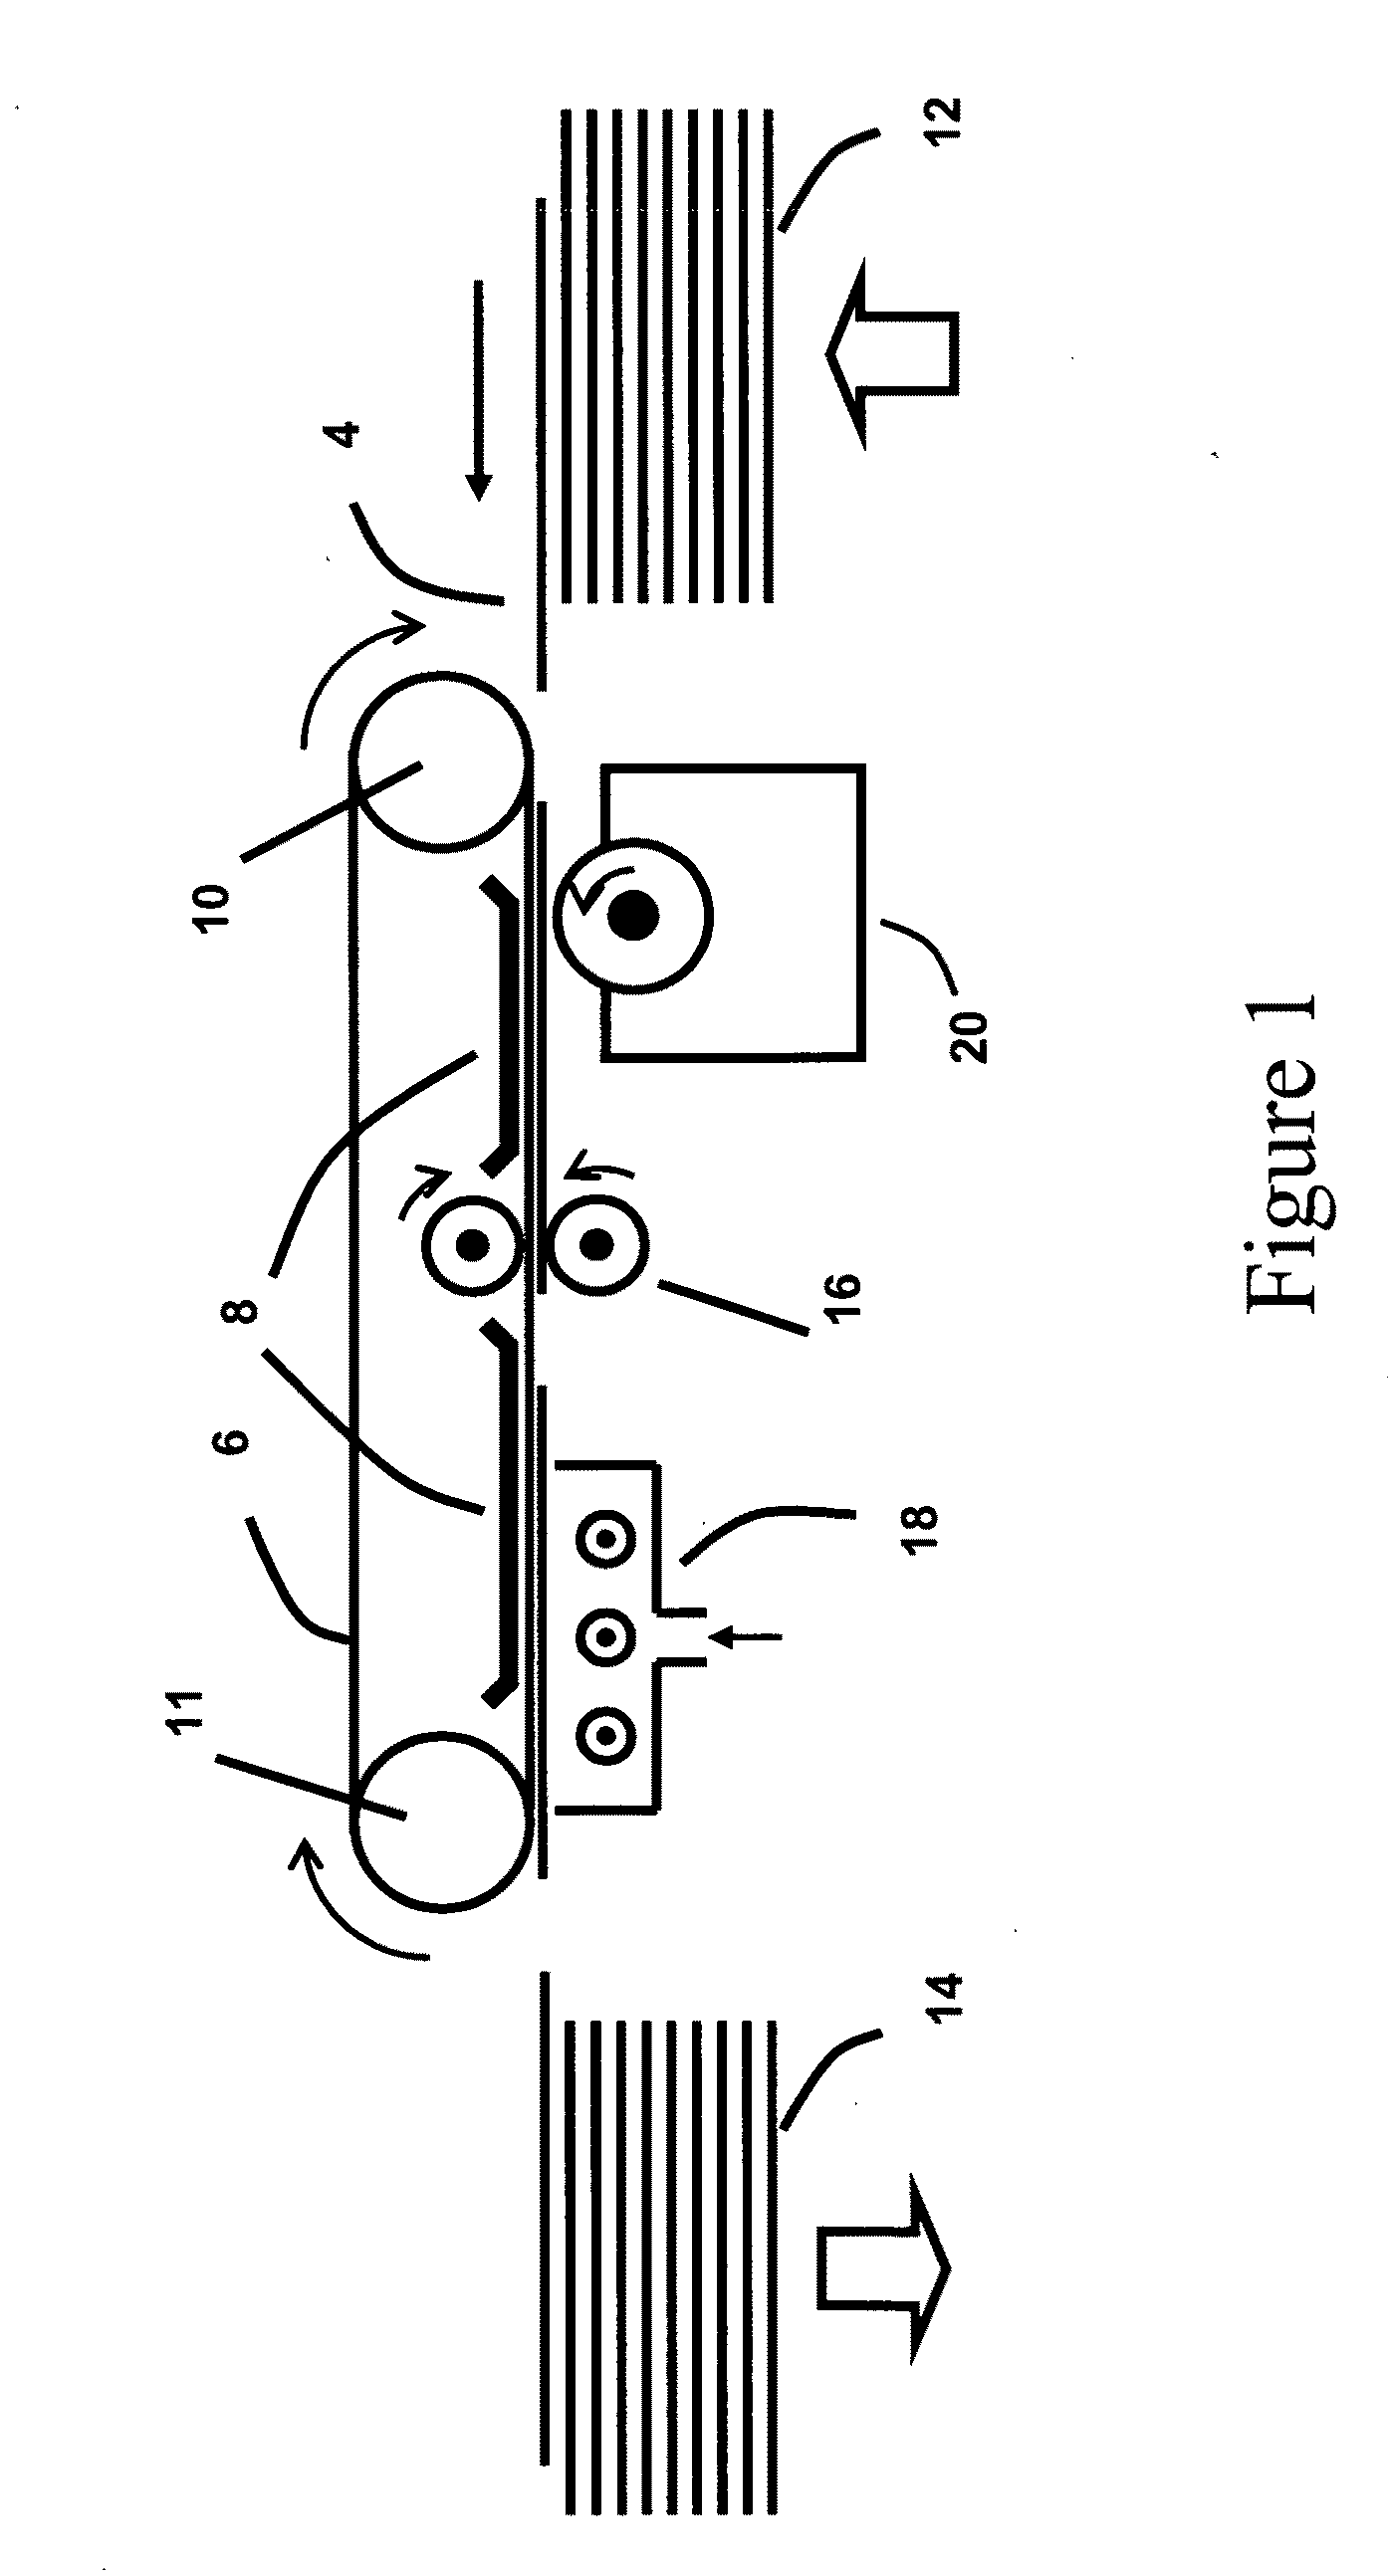 Non-interactive electrostatic deposition of induction charged conductive powder